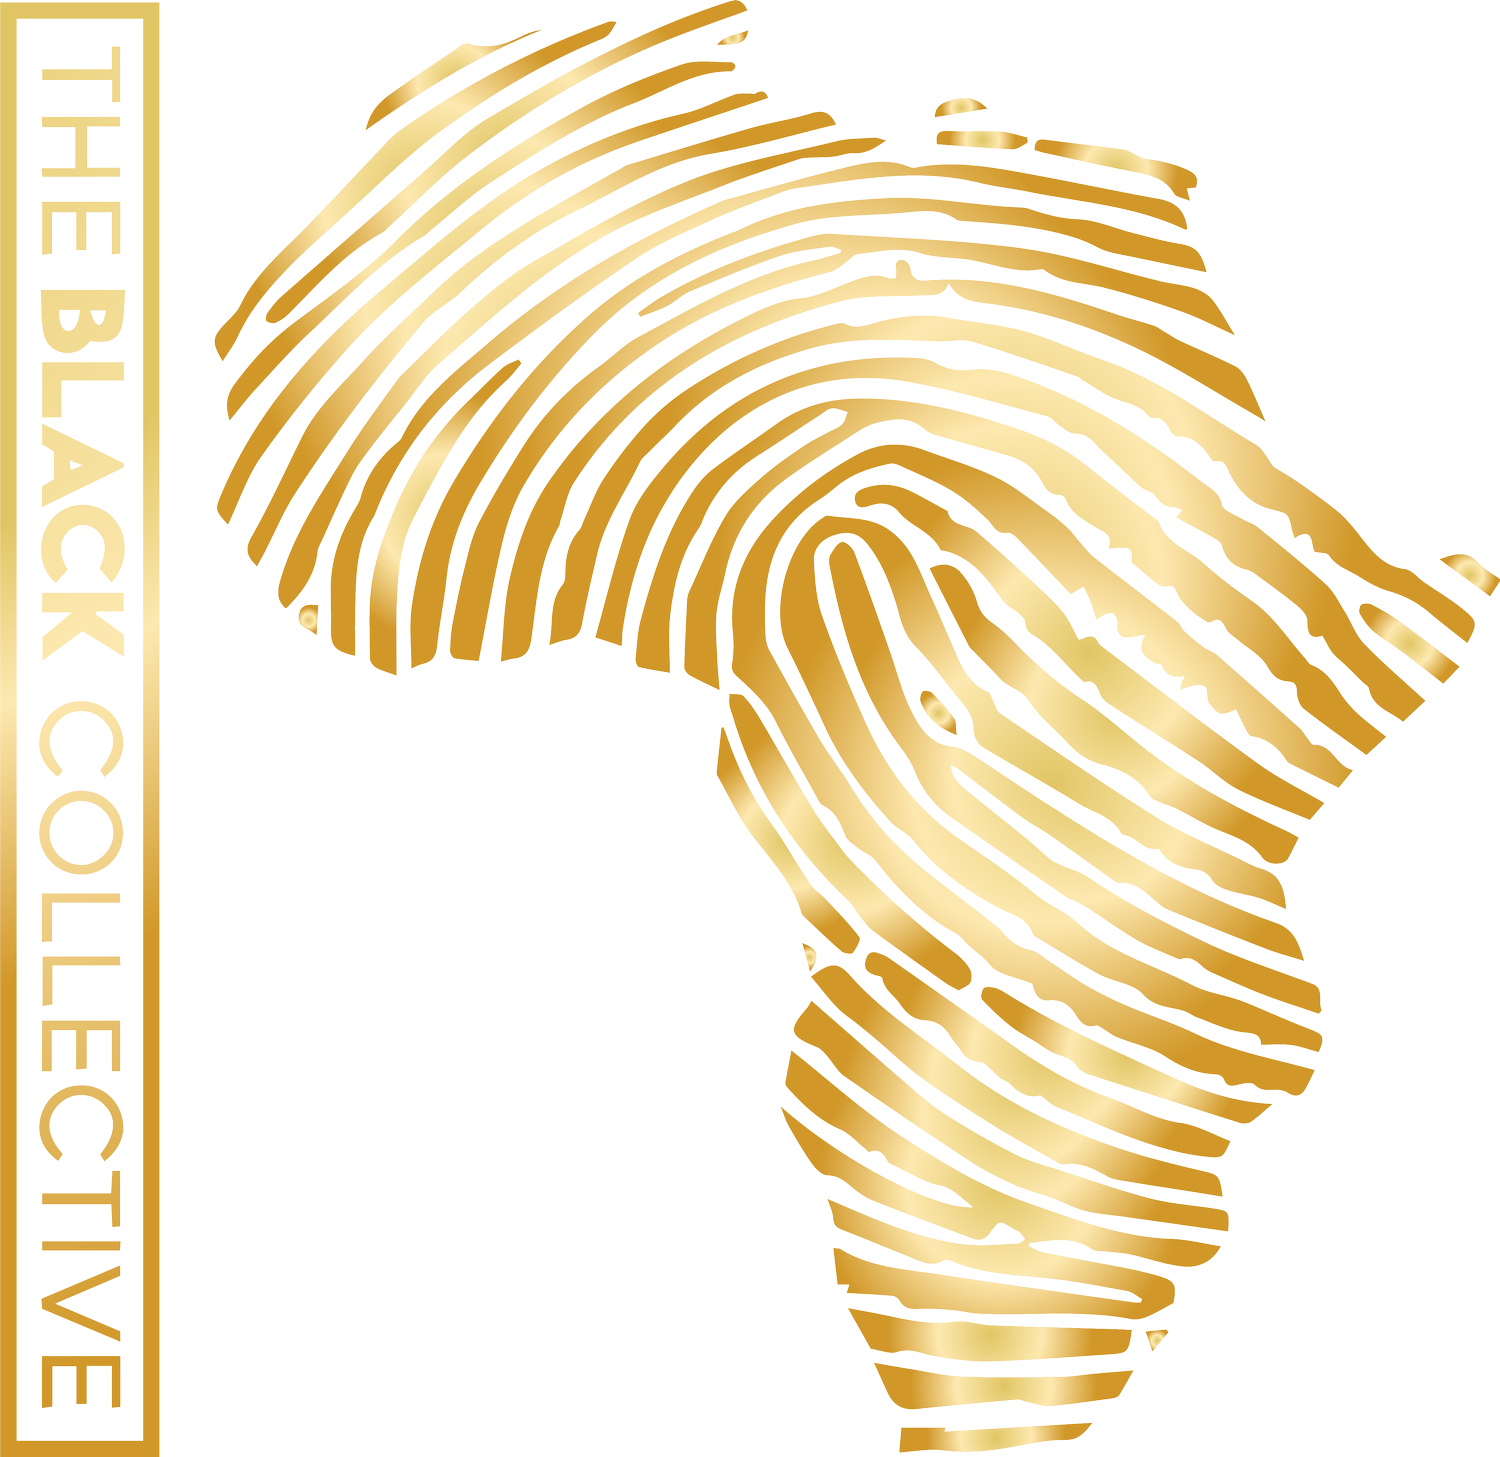 The Black Collective